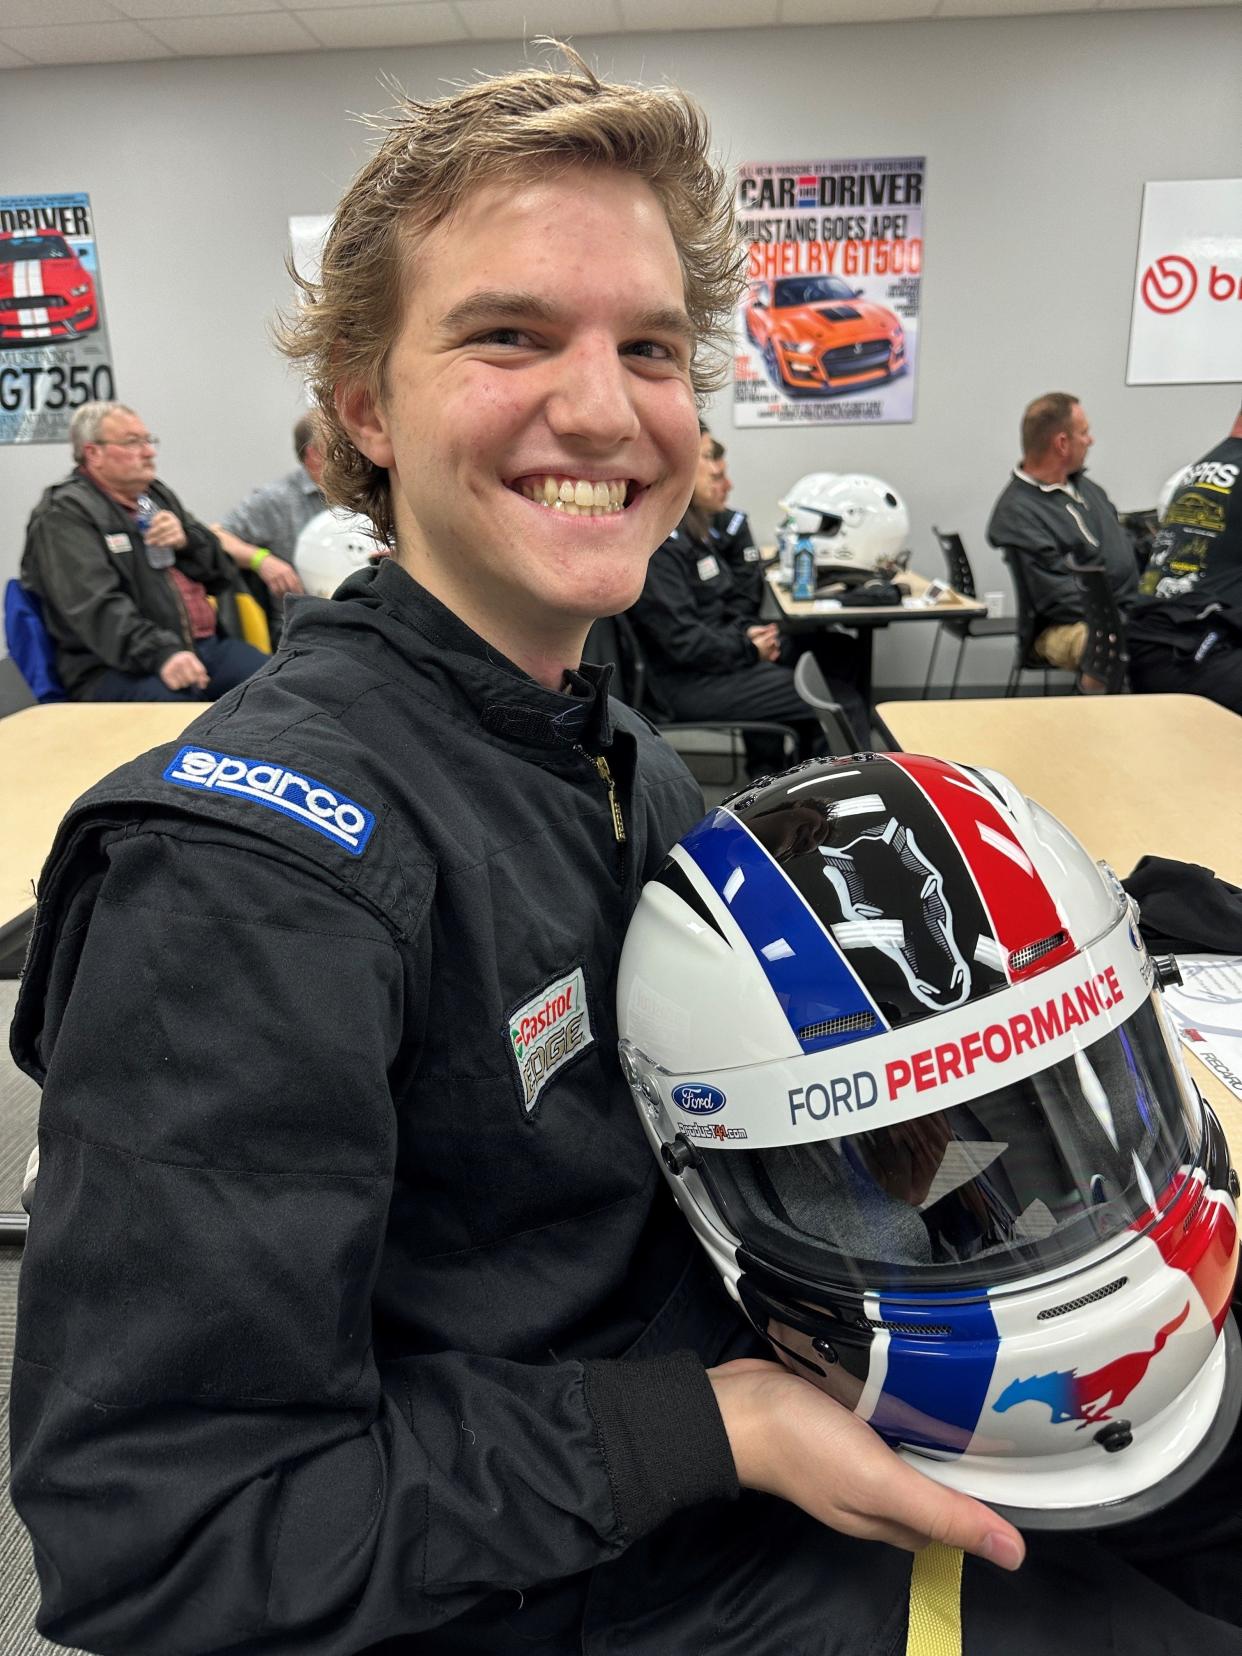 Joseph Tegerdine, 18, of Springville, Utah, is seen here at the Ford Performance Racing School in Charlotte, North Carolina, in April 2024. He is preparing to drive a 2024 Ford Mustang Dark Horse, an experience gifted by Ford CEO Jim Farley.